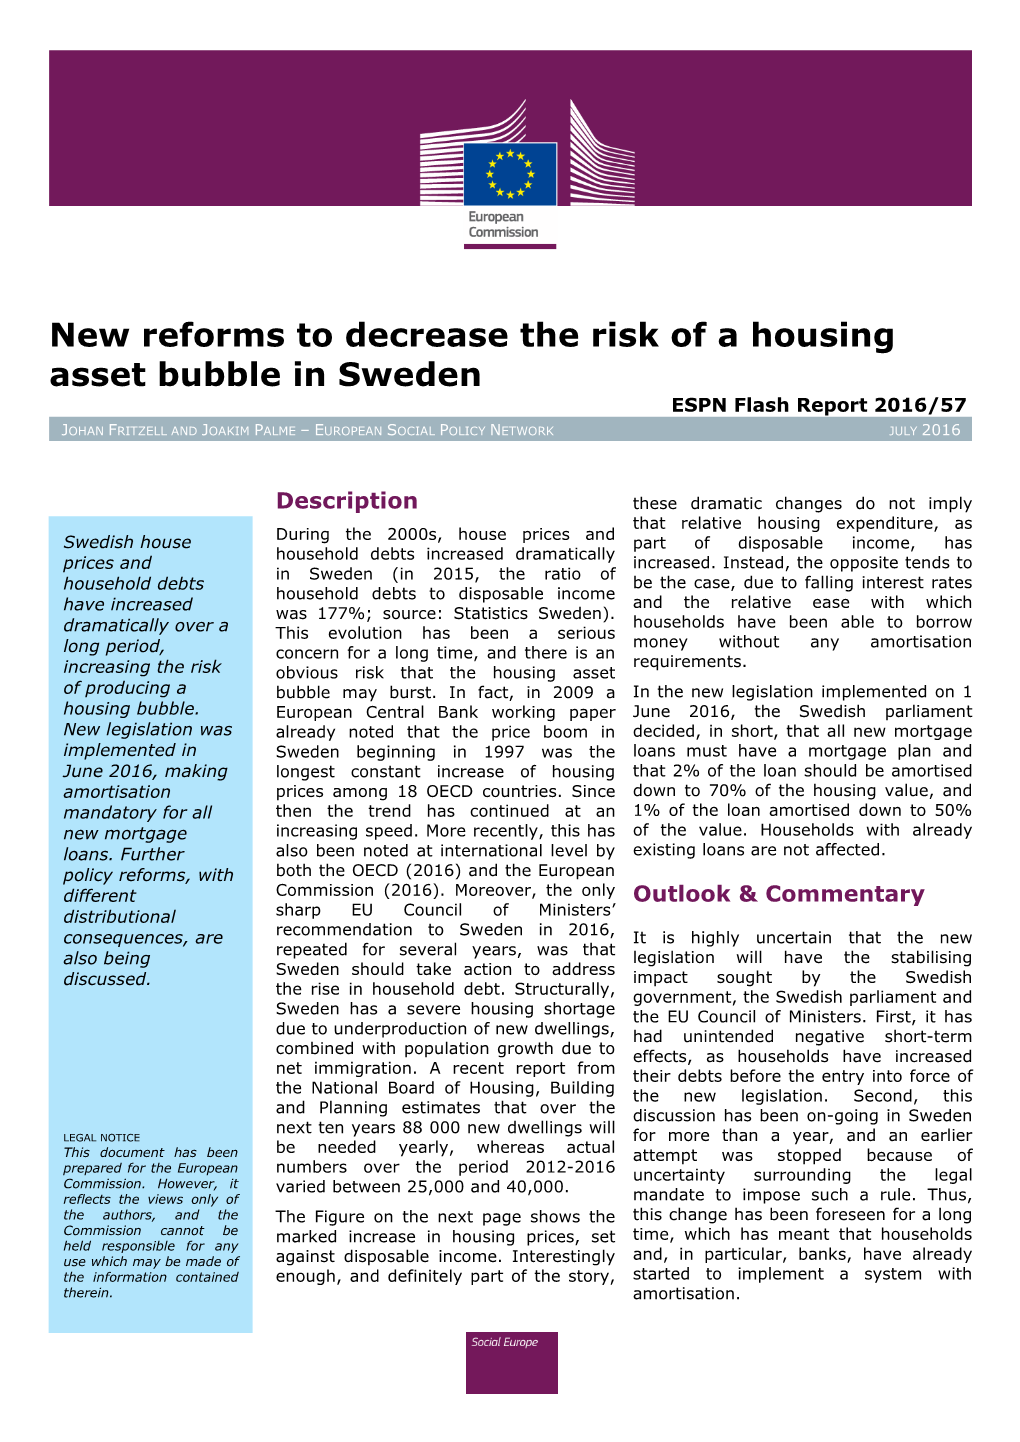 New Reforms to Decrease the Risk of a Housing Asset Bubble in Sweden